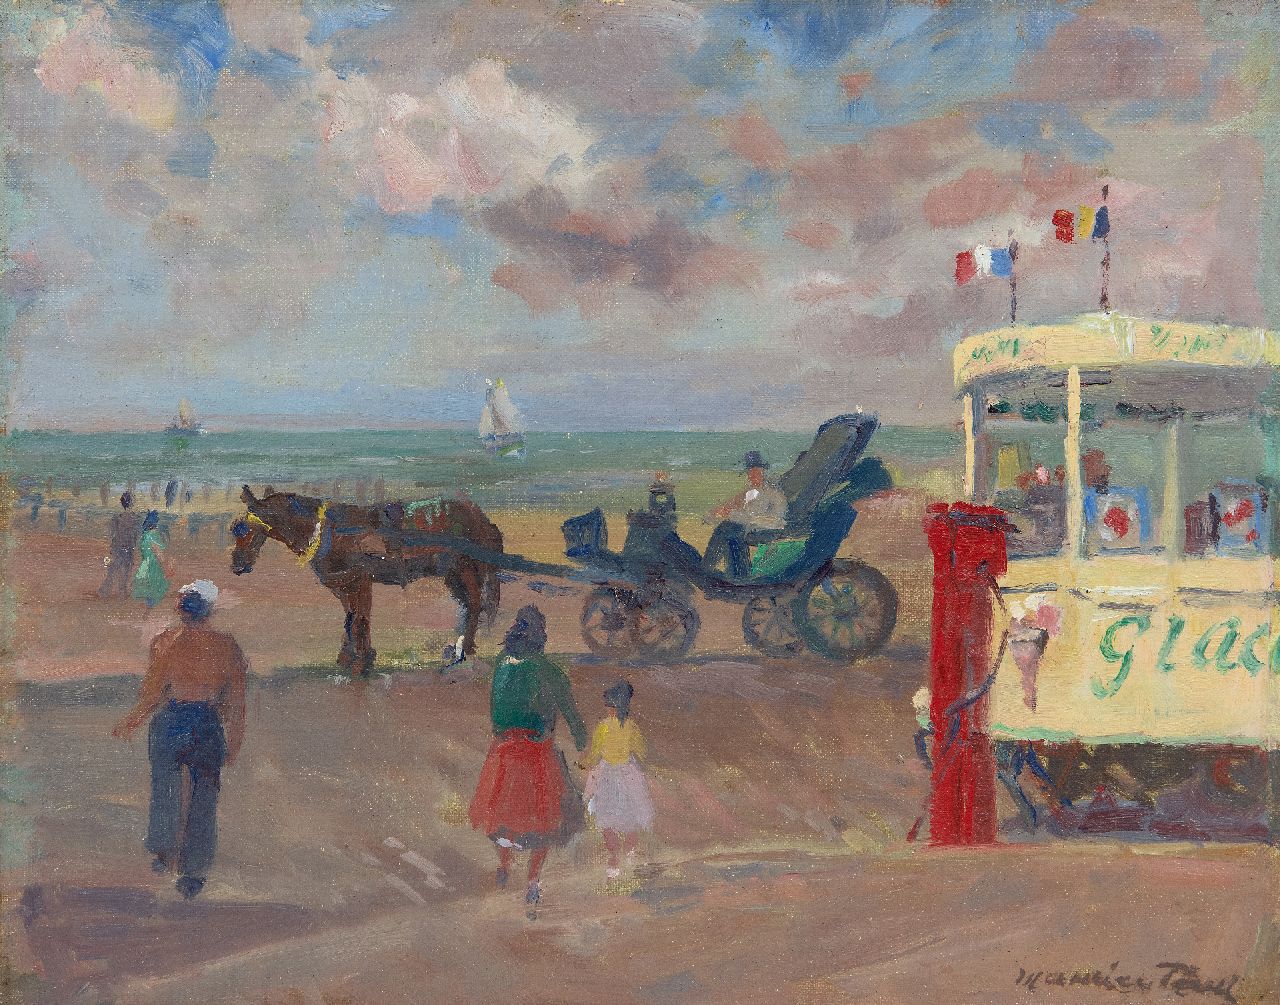 Paul M.  | Maurice Paul, Selling ice cream at the beach, oil on canvas laid down on board 28.2 x 36.1 cm, signed l.r.